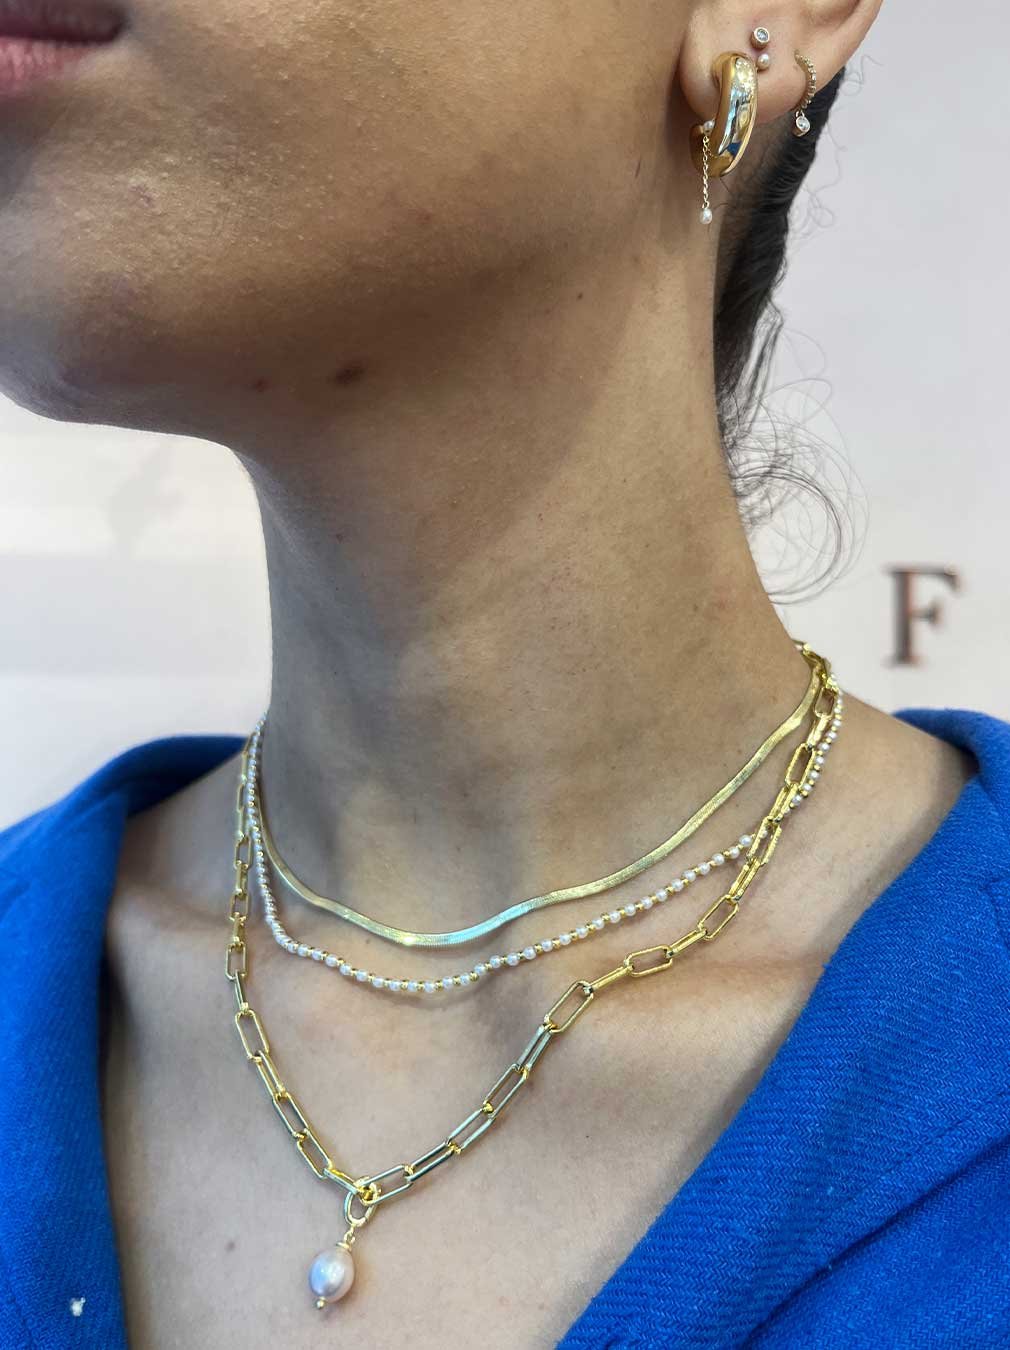 woman wearing gold plated earrings and necklaces